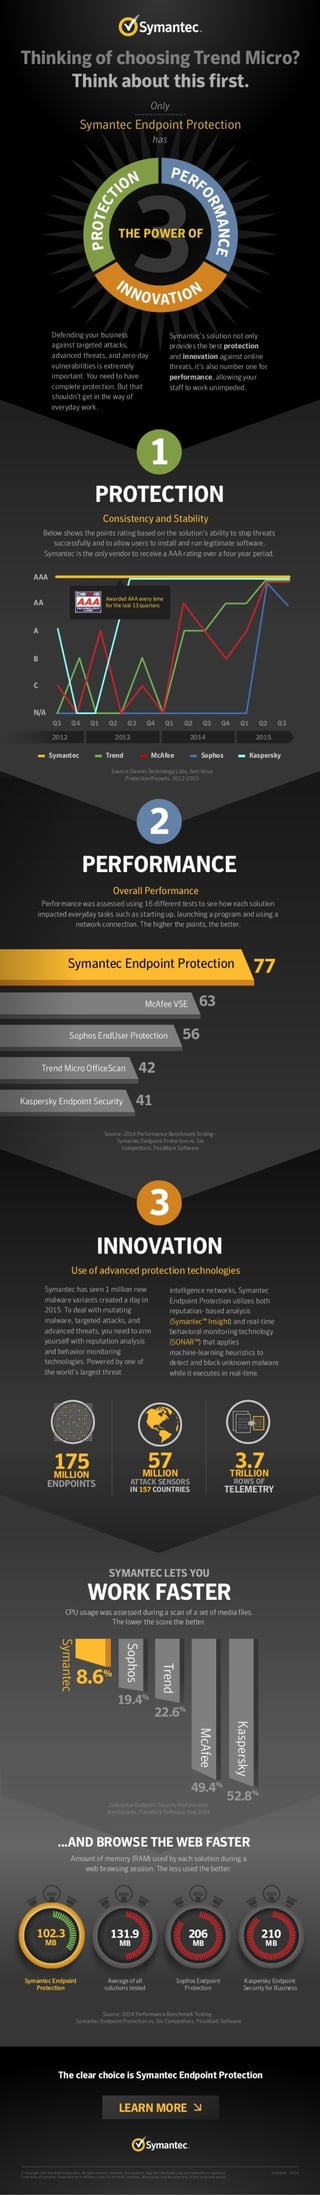 Symantec Infographic: Thinking of choosing Trend Micro?